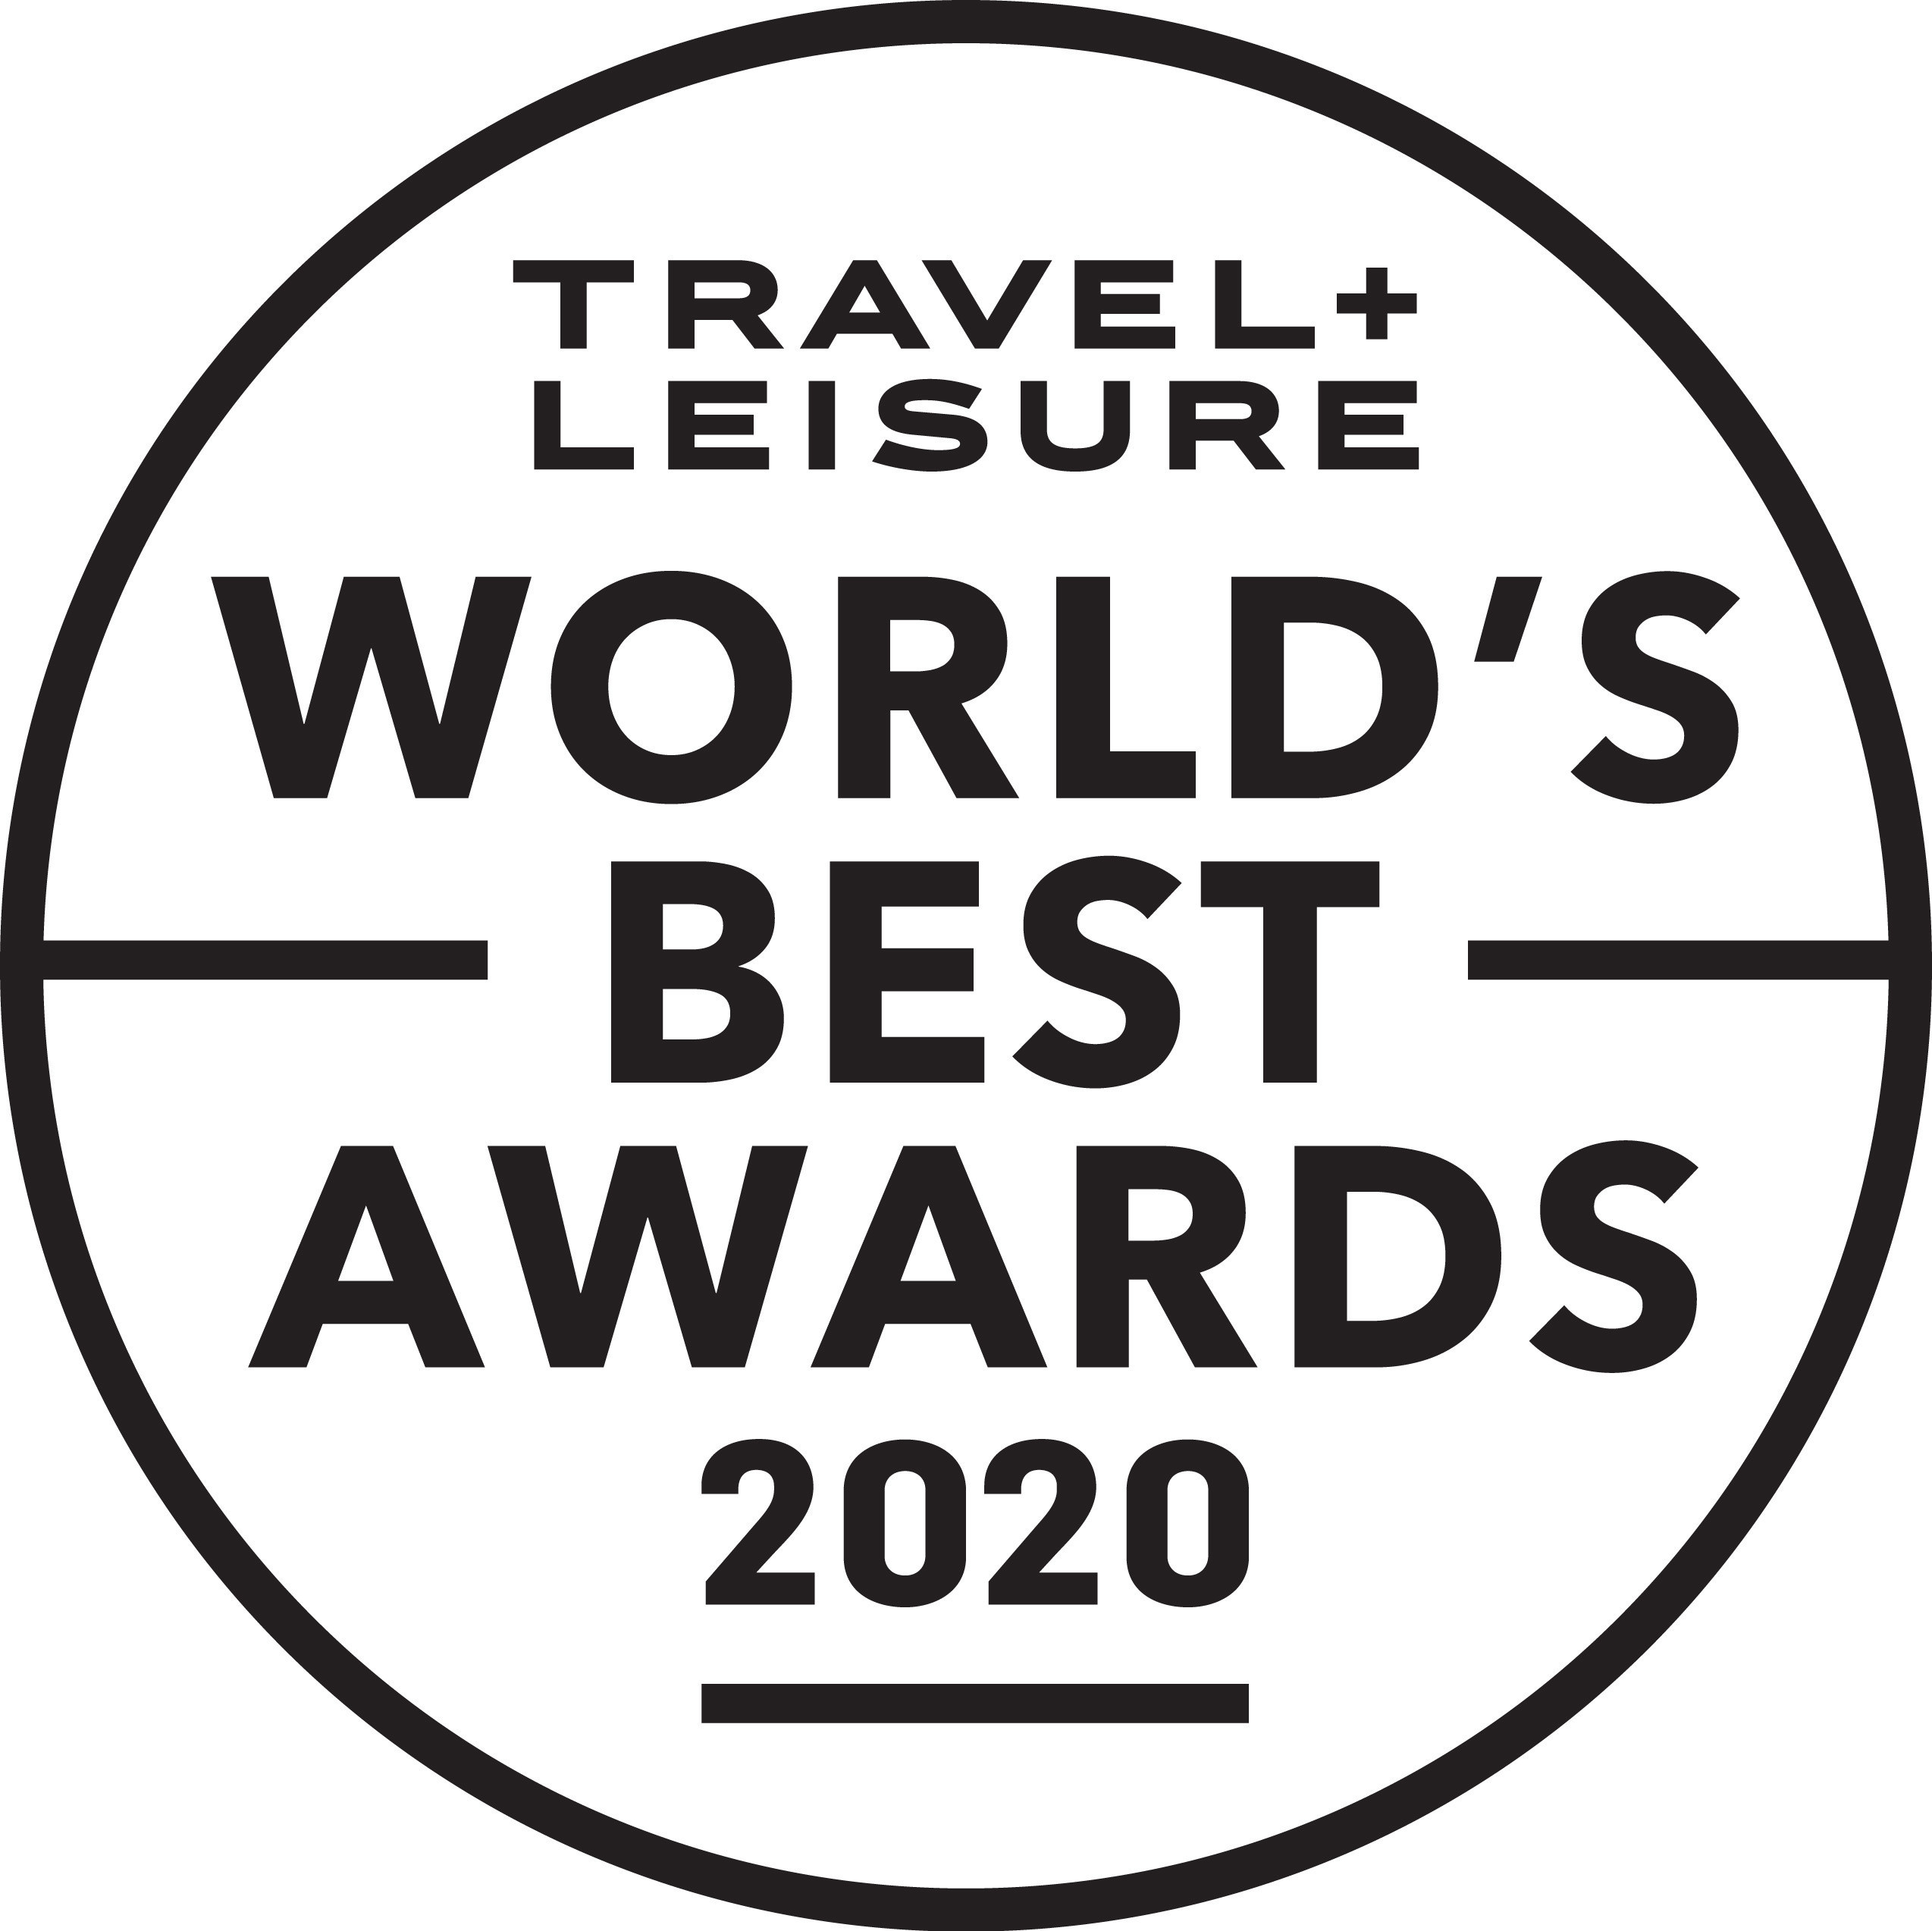 Oaxaca, Mexico, Is No. 1 City Overall in 25th Annual Travel + Leisure World's Best Awards